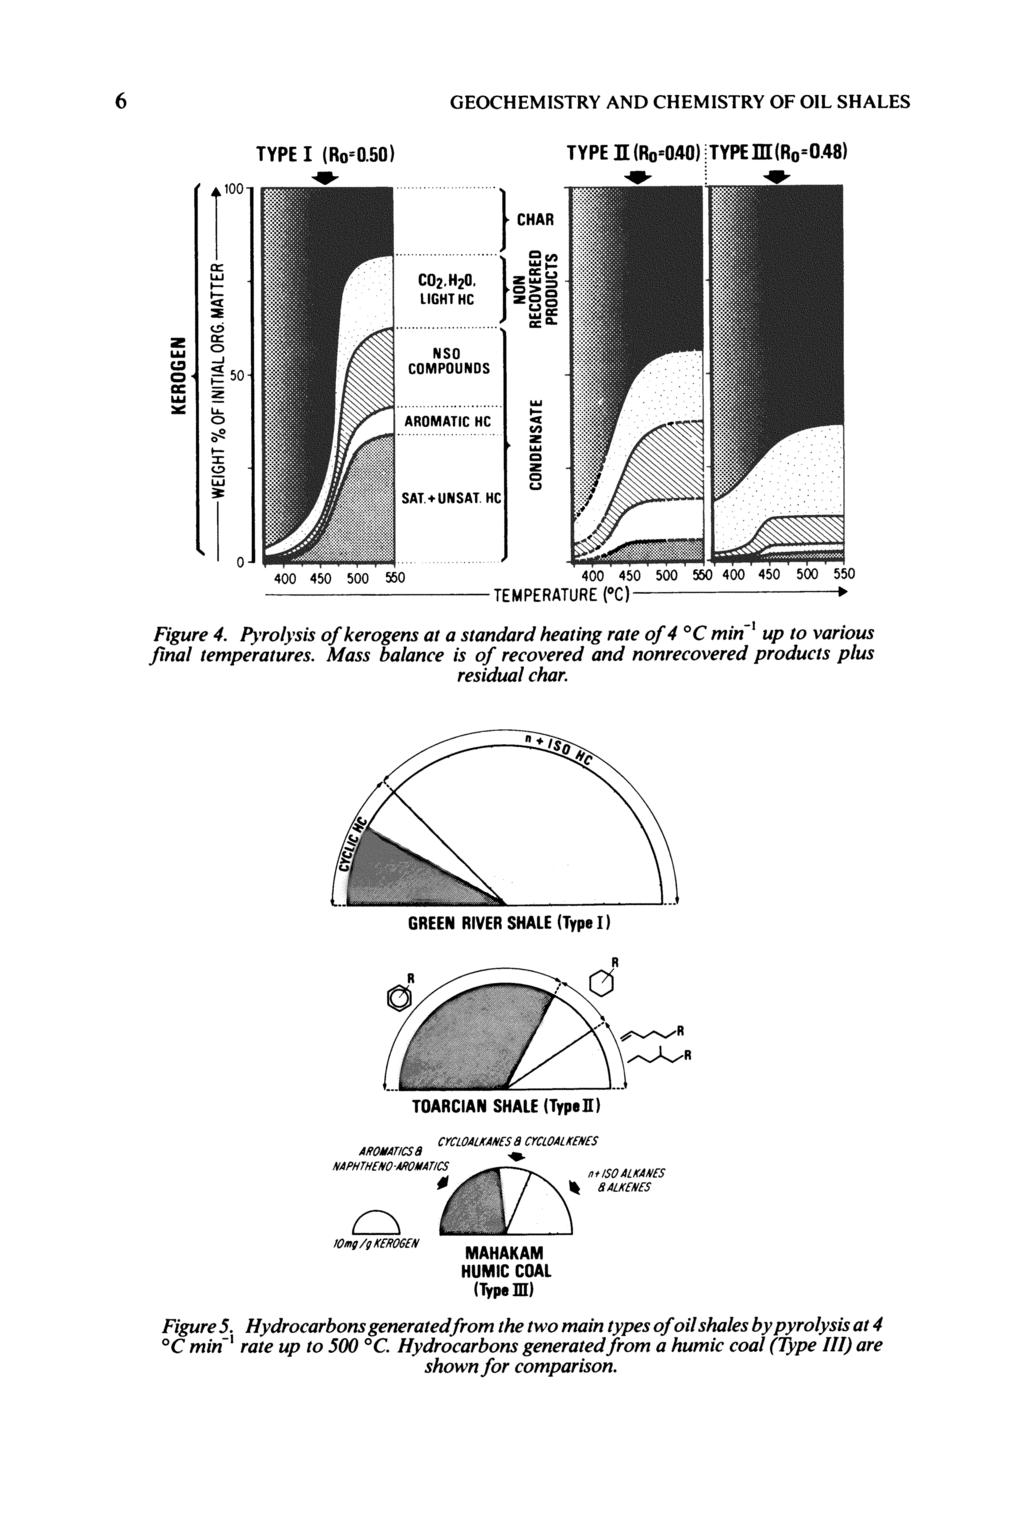 6 GEOCHEMISTRY AND CHEMISTRY OF OIL SHALES Figure 4. Pyrolysis of kerogens at a standard heating rate of 4 C min' up to various final temperatures.